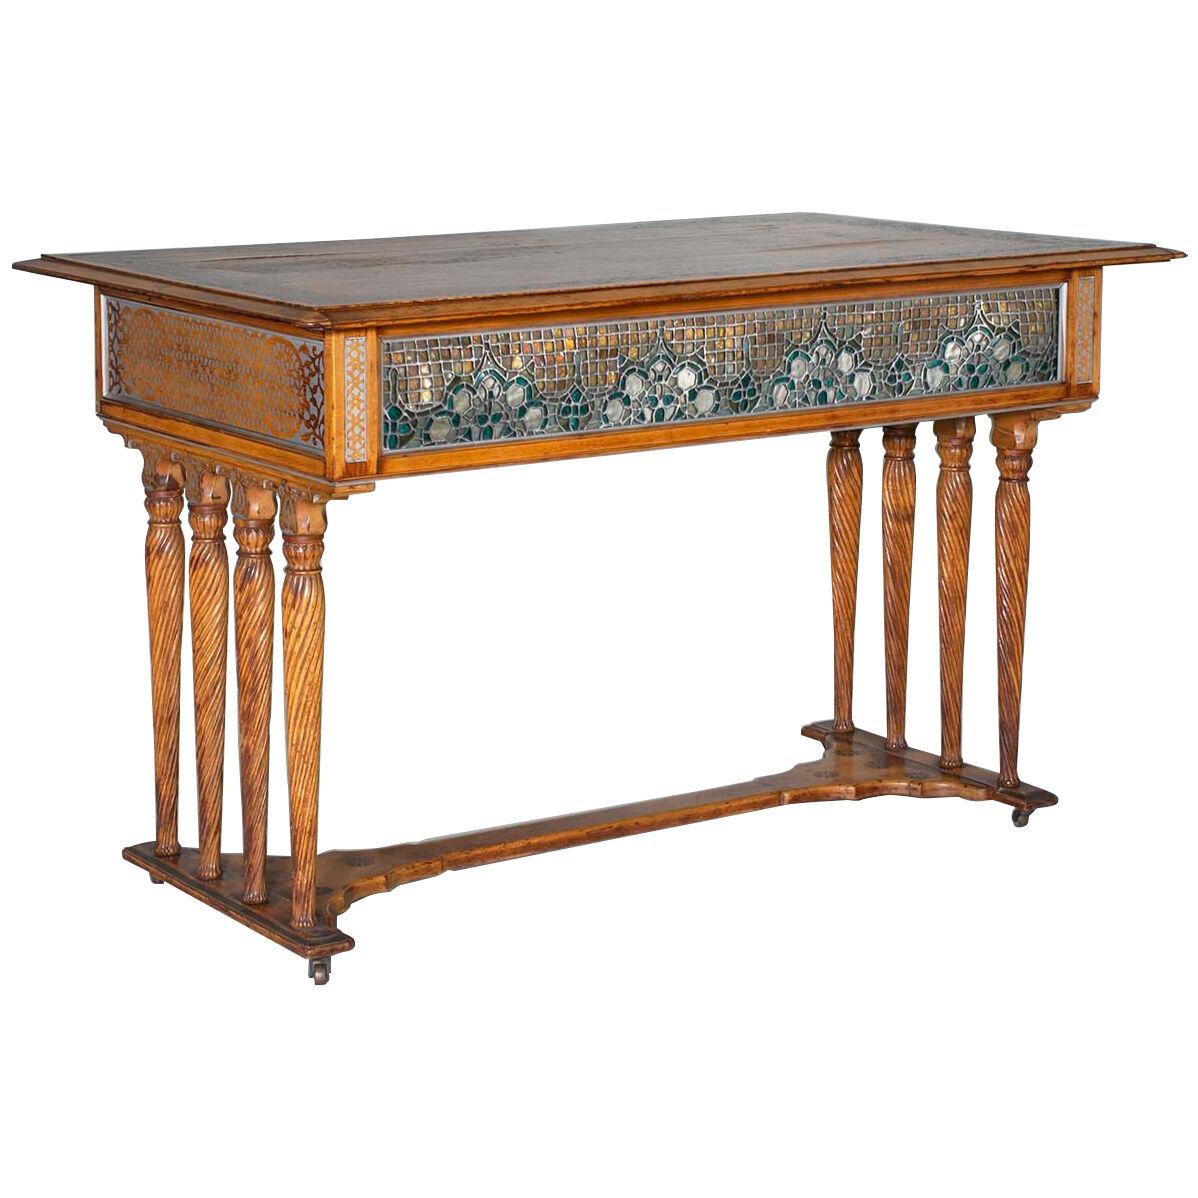 Unique Center Table with Leaded Glass Panels